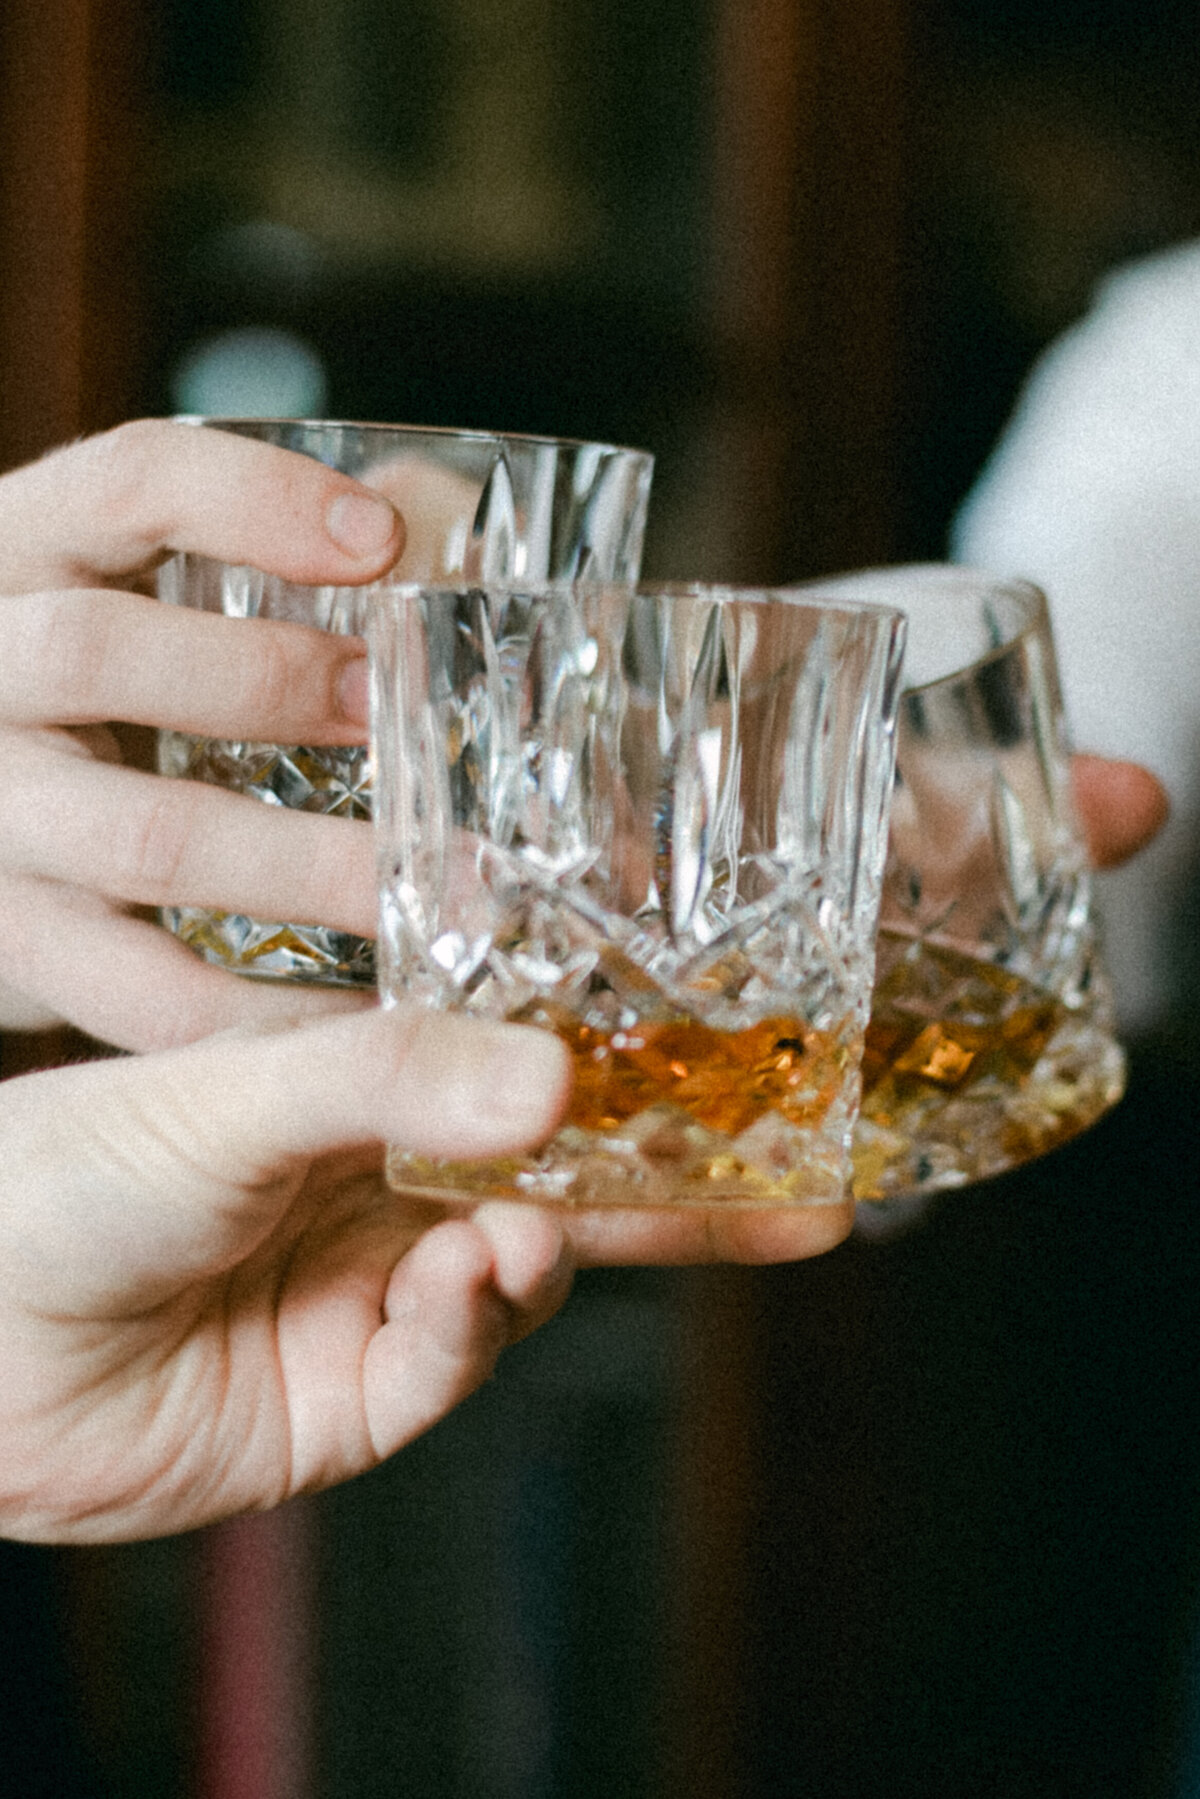 Glasses of whisky in an image captured by wedding photographer Hannika Gabrielsson.